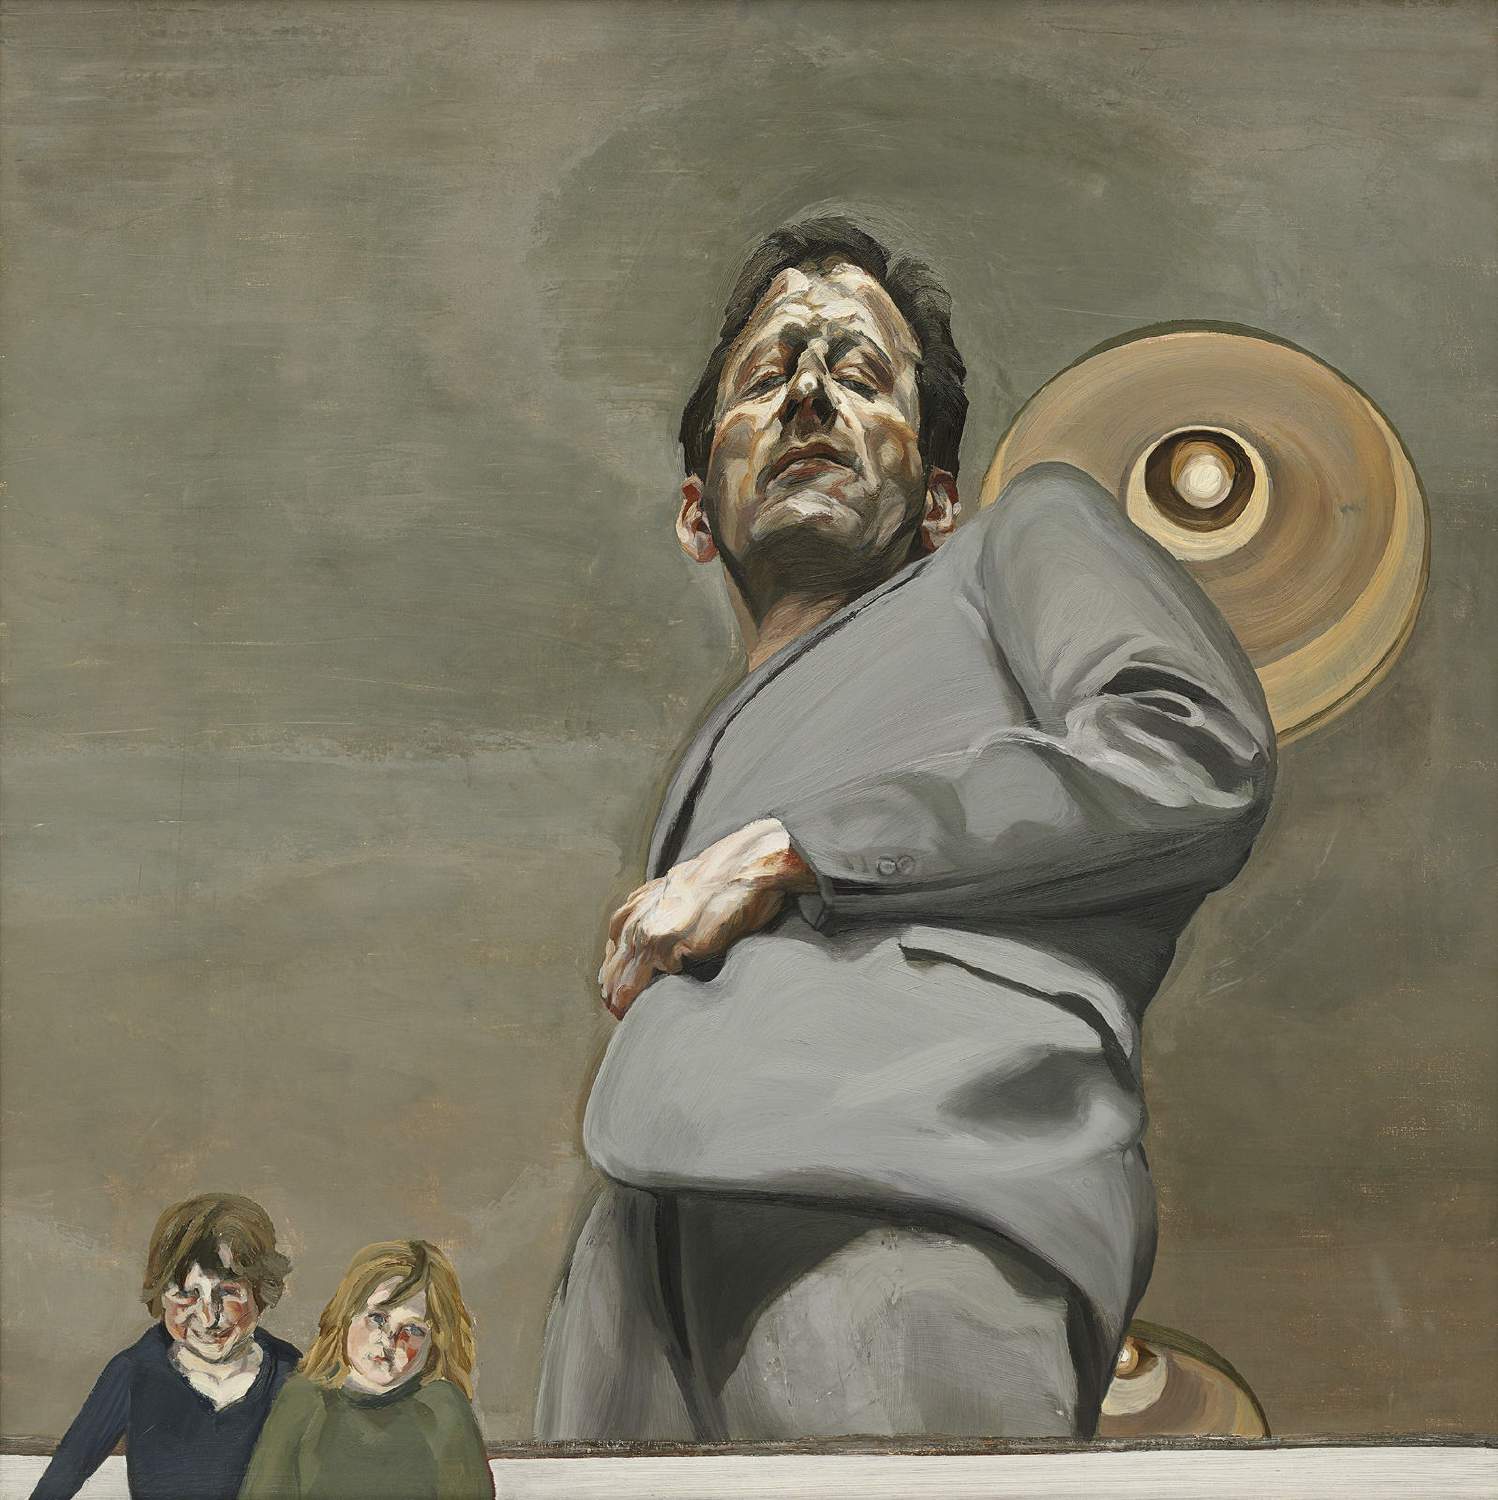 Lucian Freud: a portrait of the artist as a young (and an old) man